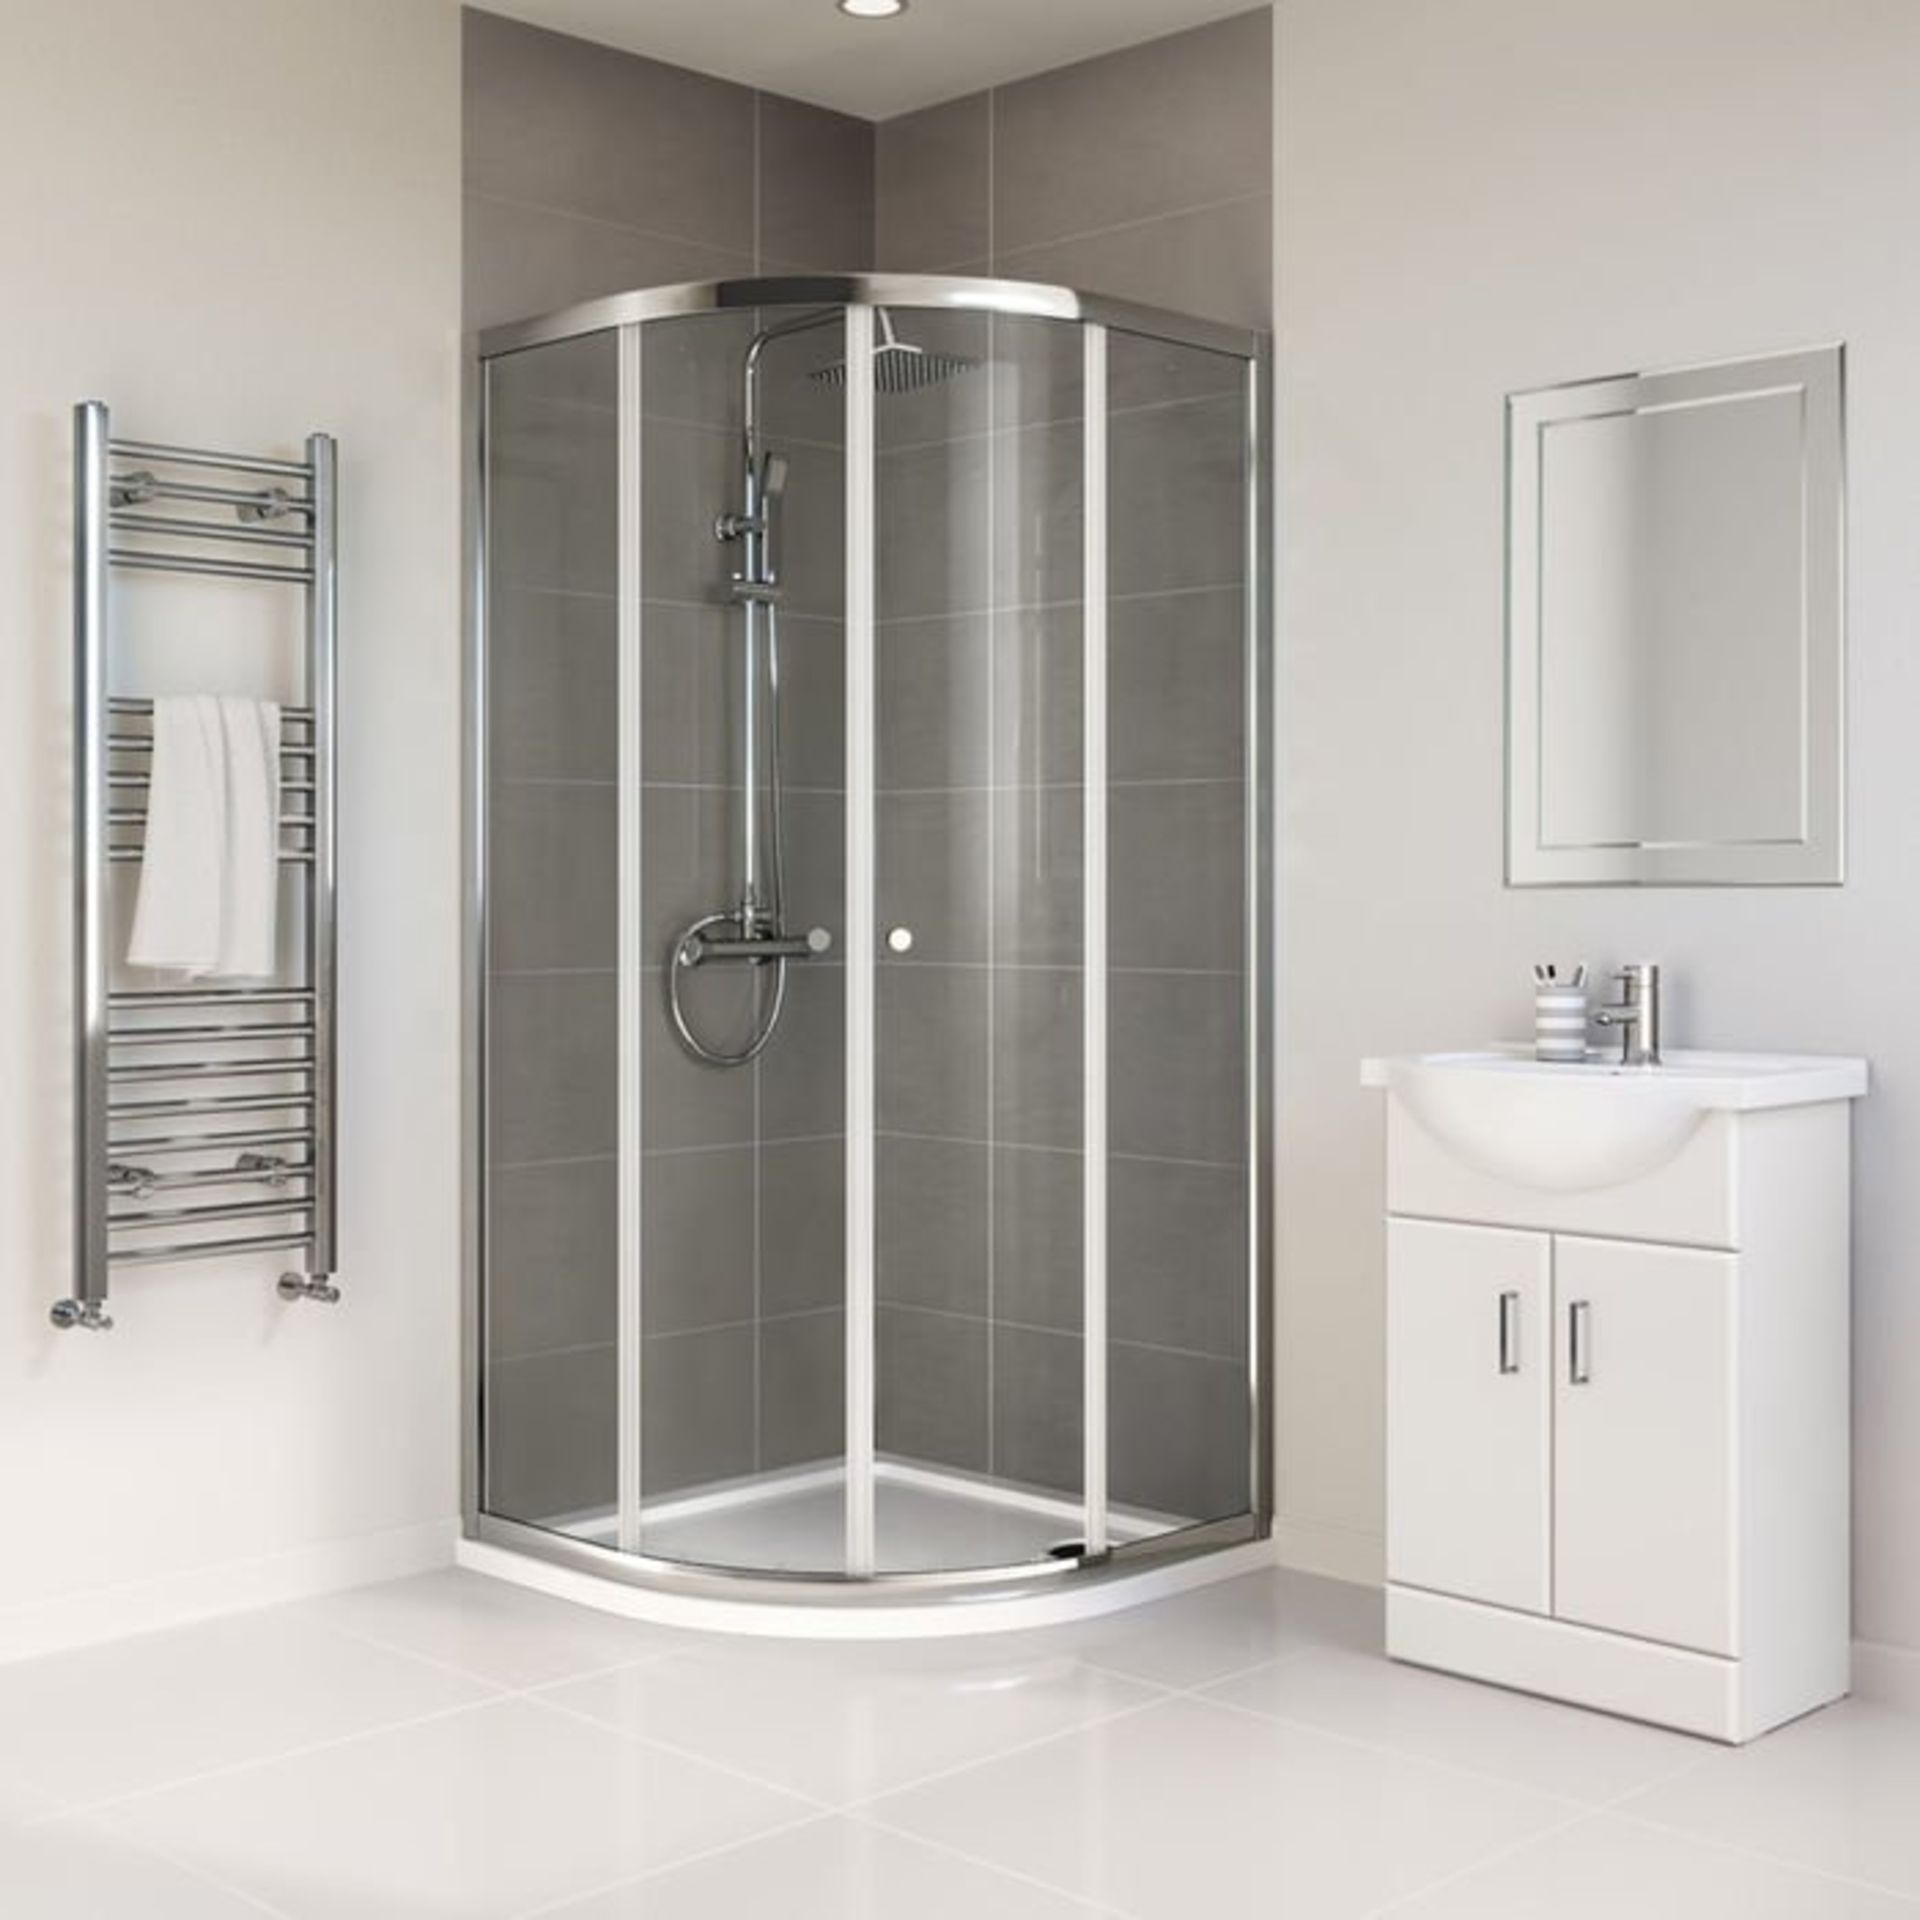 (G44) 800x800mm - Elements Quadrant Shower Enclosure RRP £199.99 4mm Safety Glass Fully waterproof - Image 3 of 6